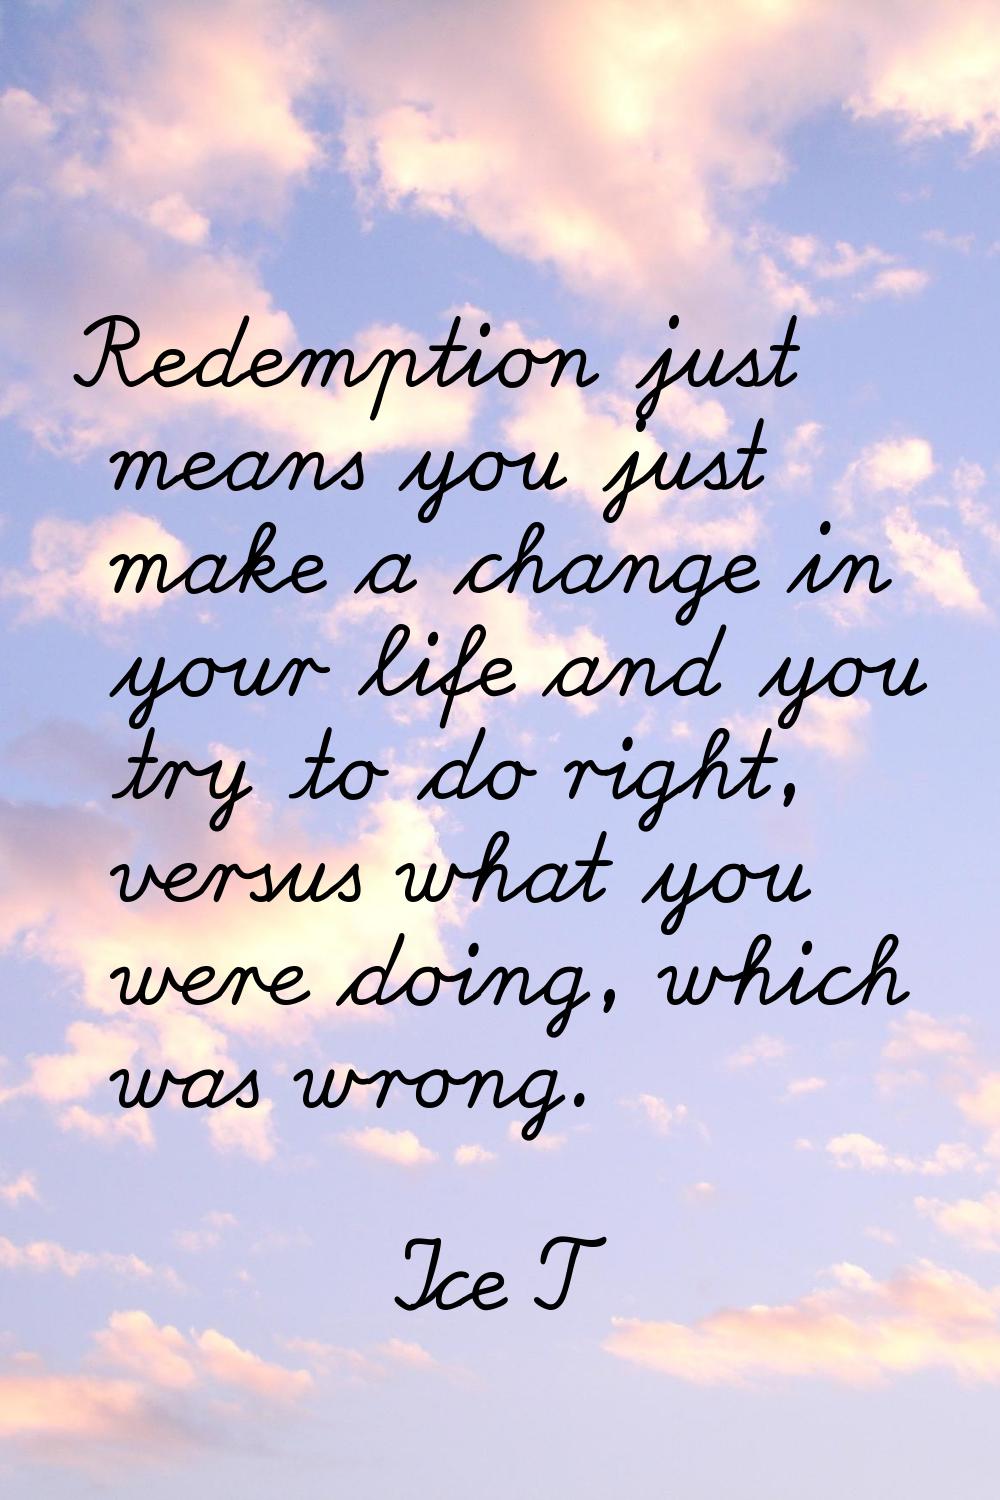 Redemption just means you just make a change in your life and you try to do right, versus what you 